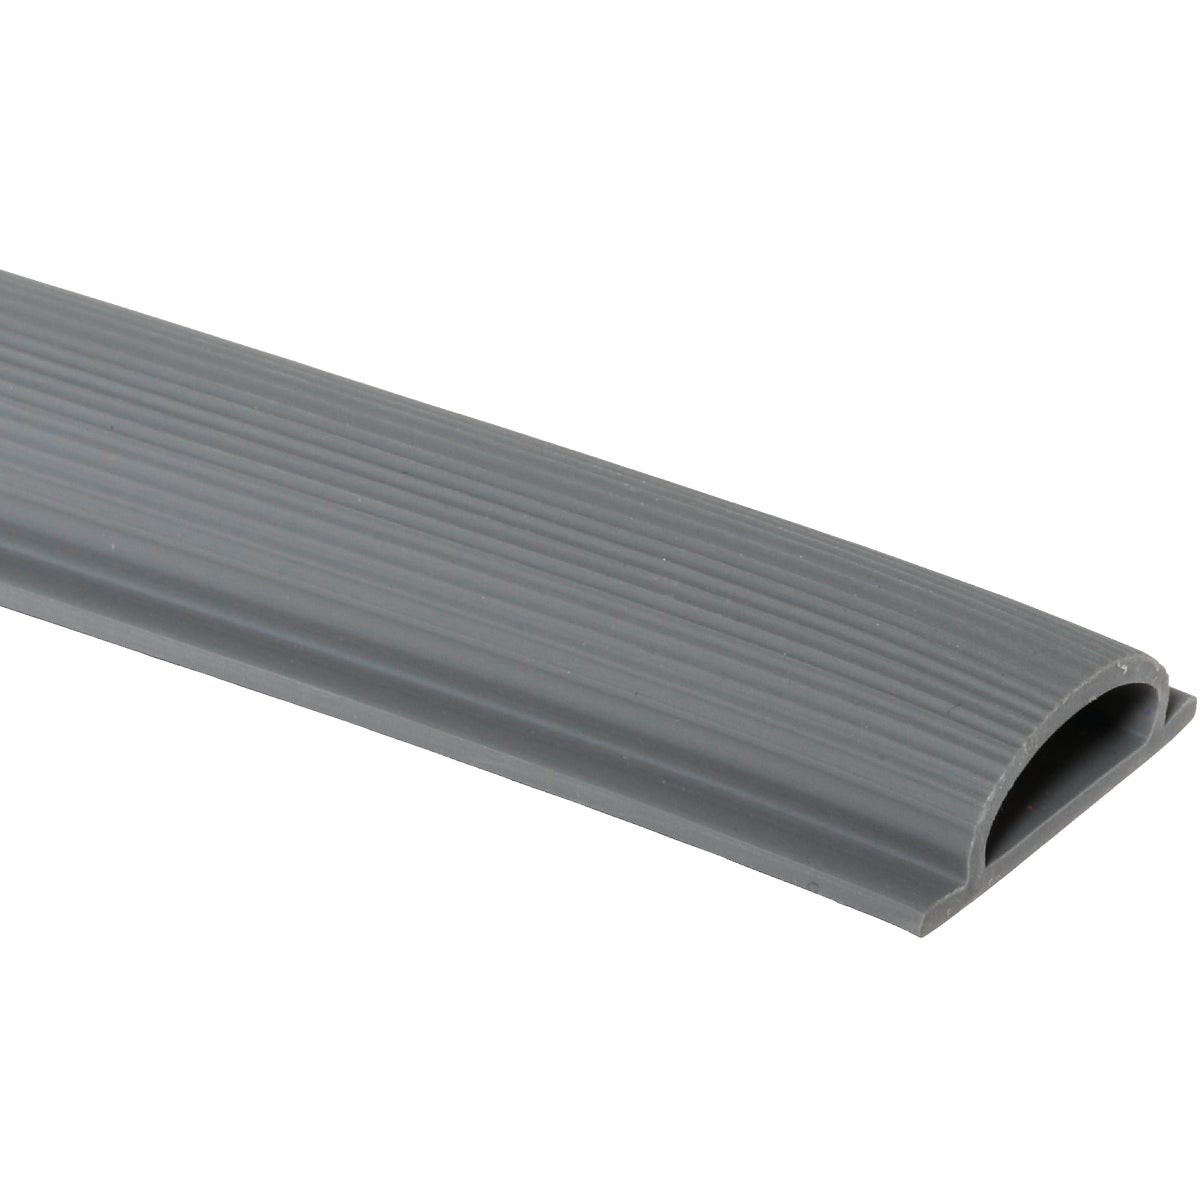 Item 264920, For 32 In. and 36 In. long extruded aluminum thresholds.